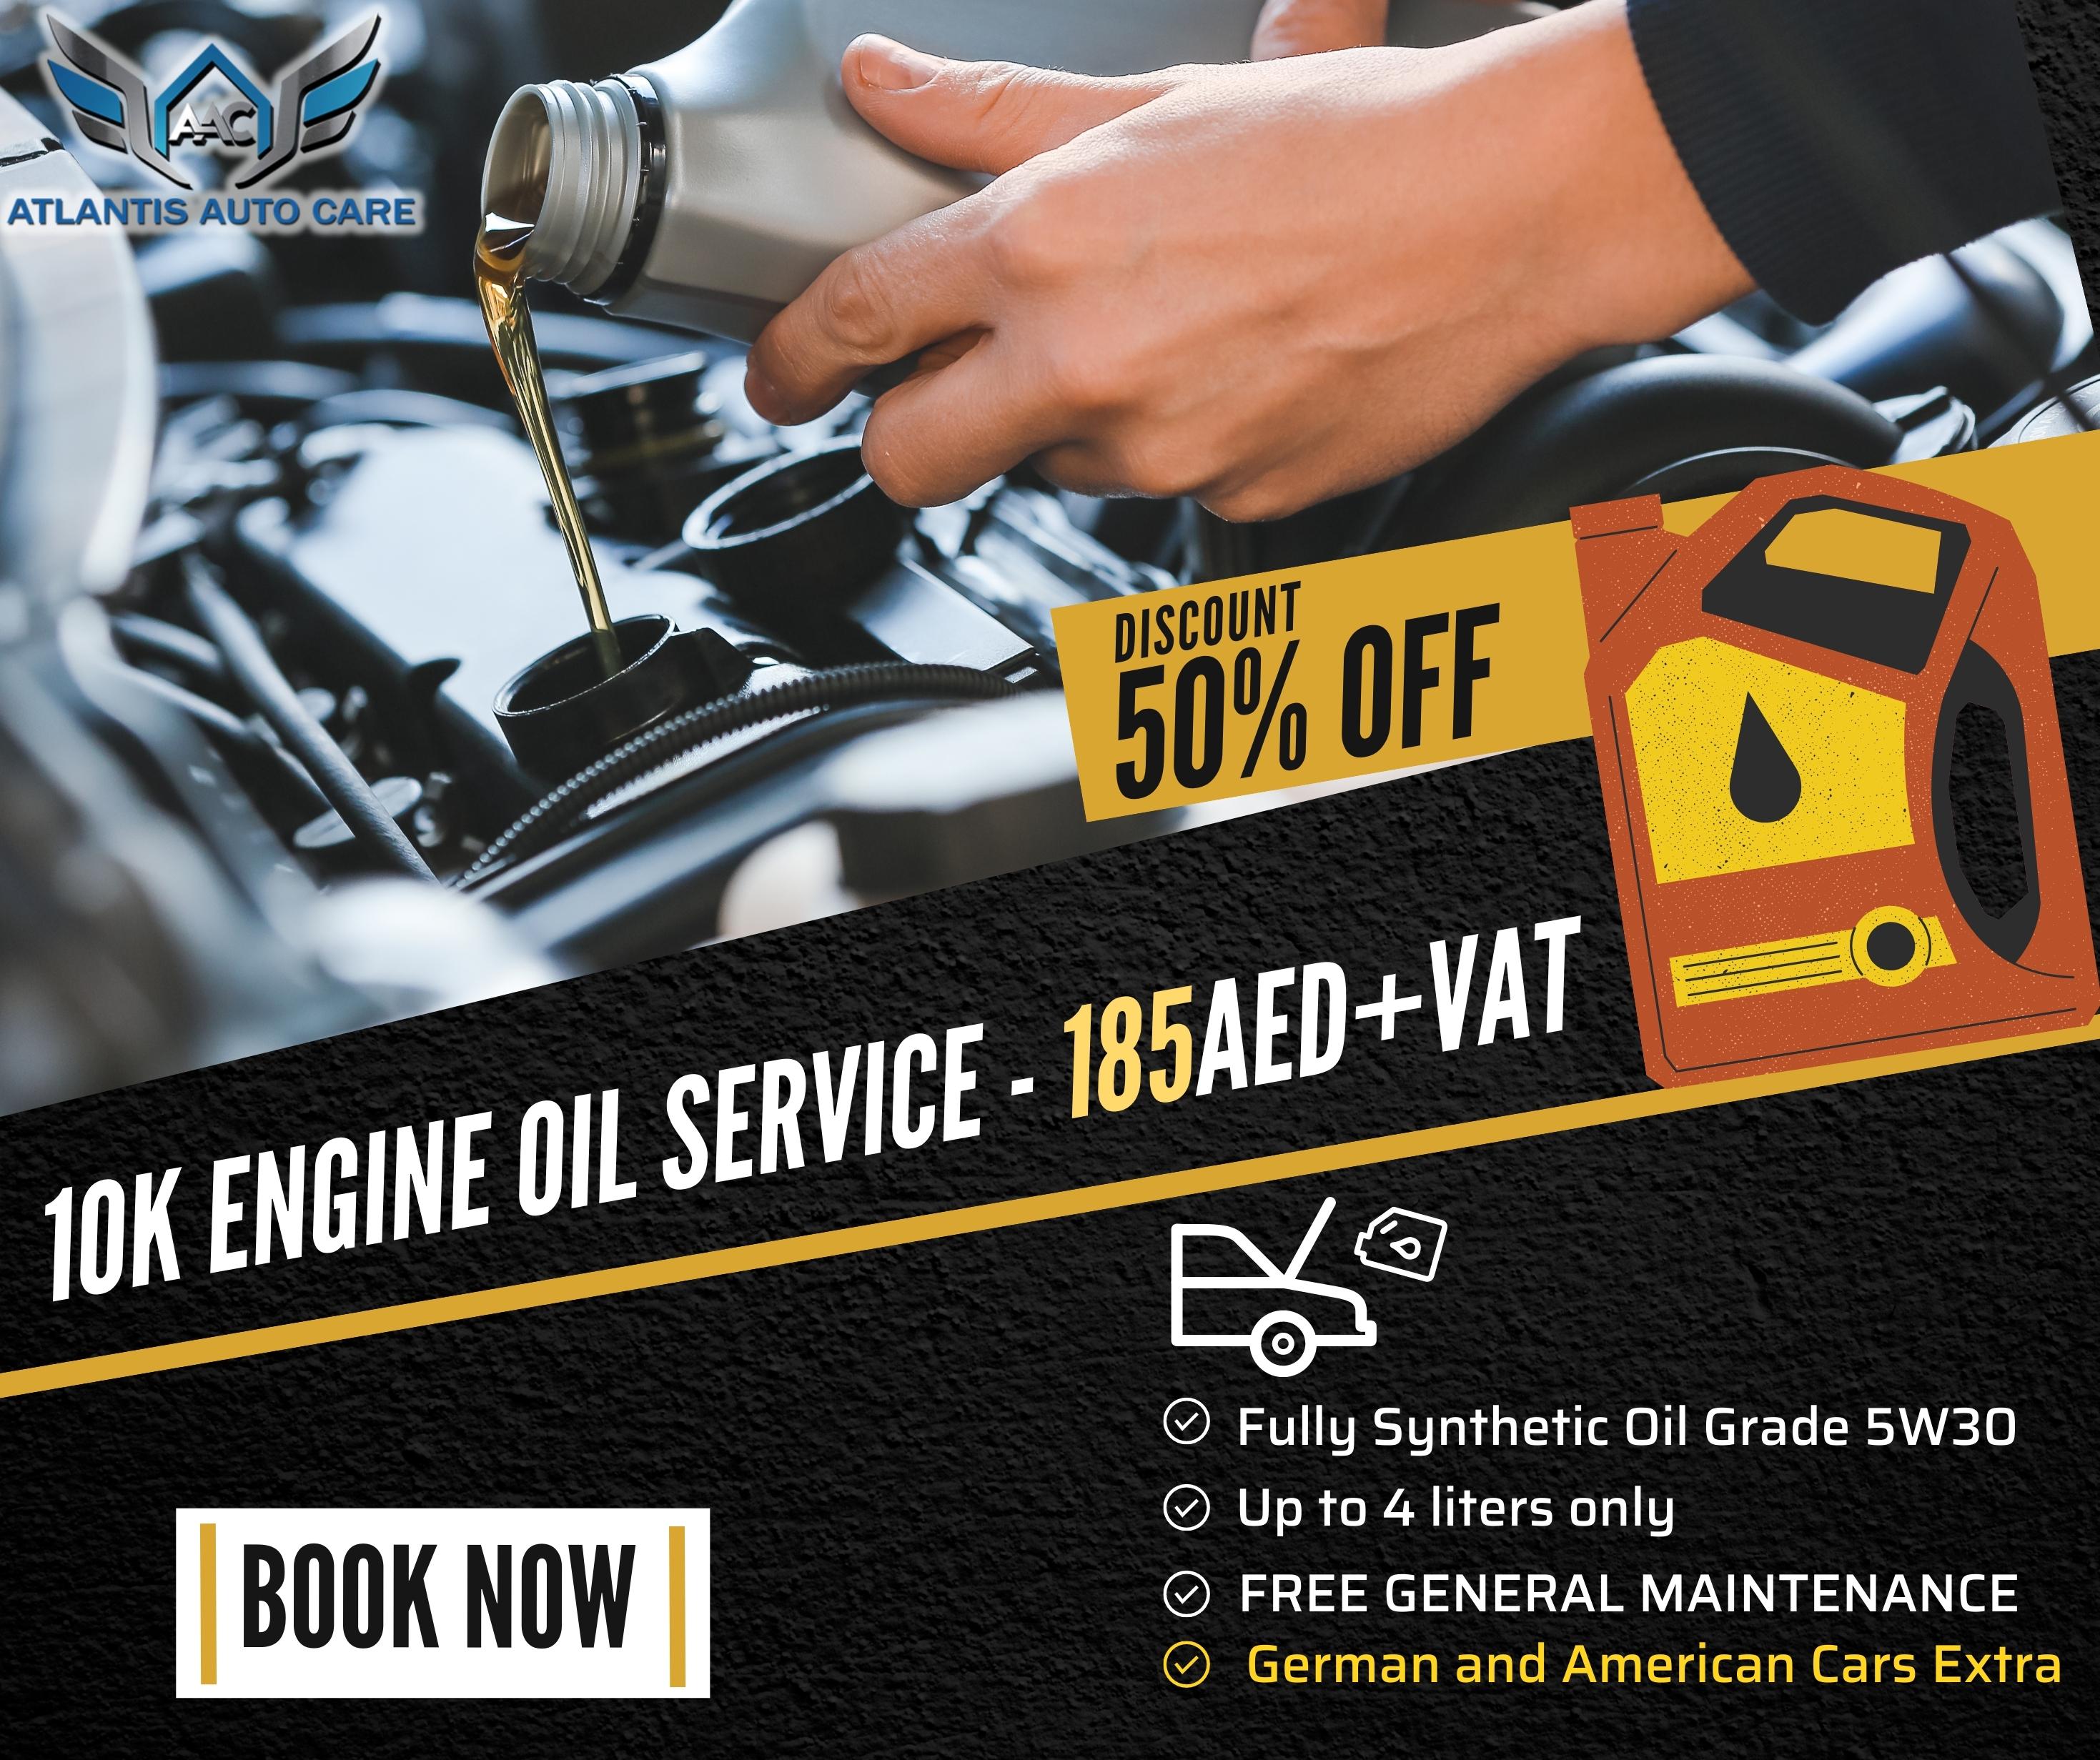 50% Discount on 10K Engine Oil Service @ 199 AED With Free General Maintenance.